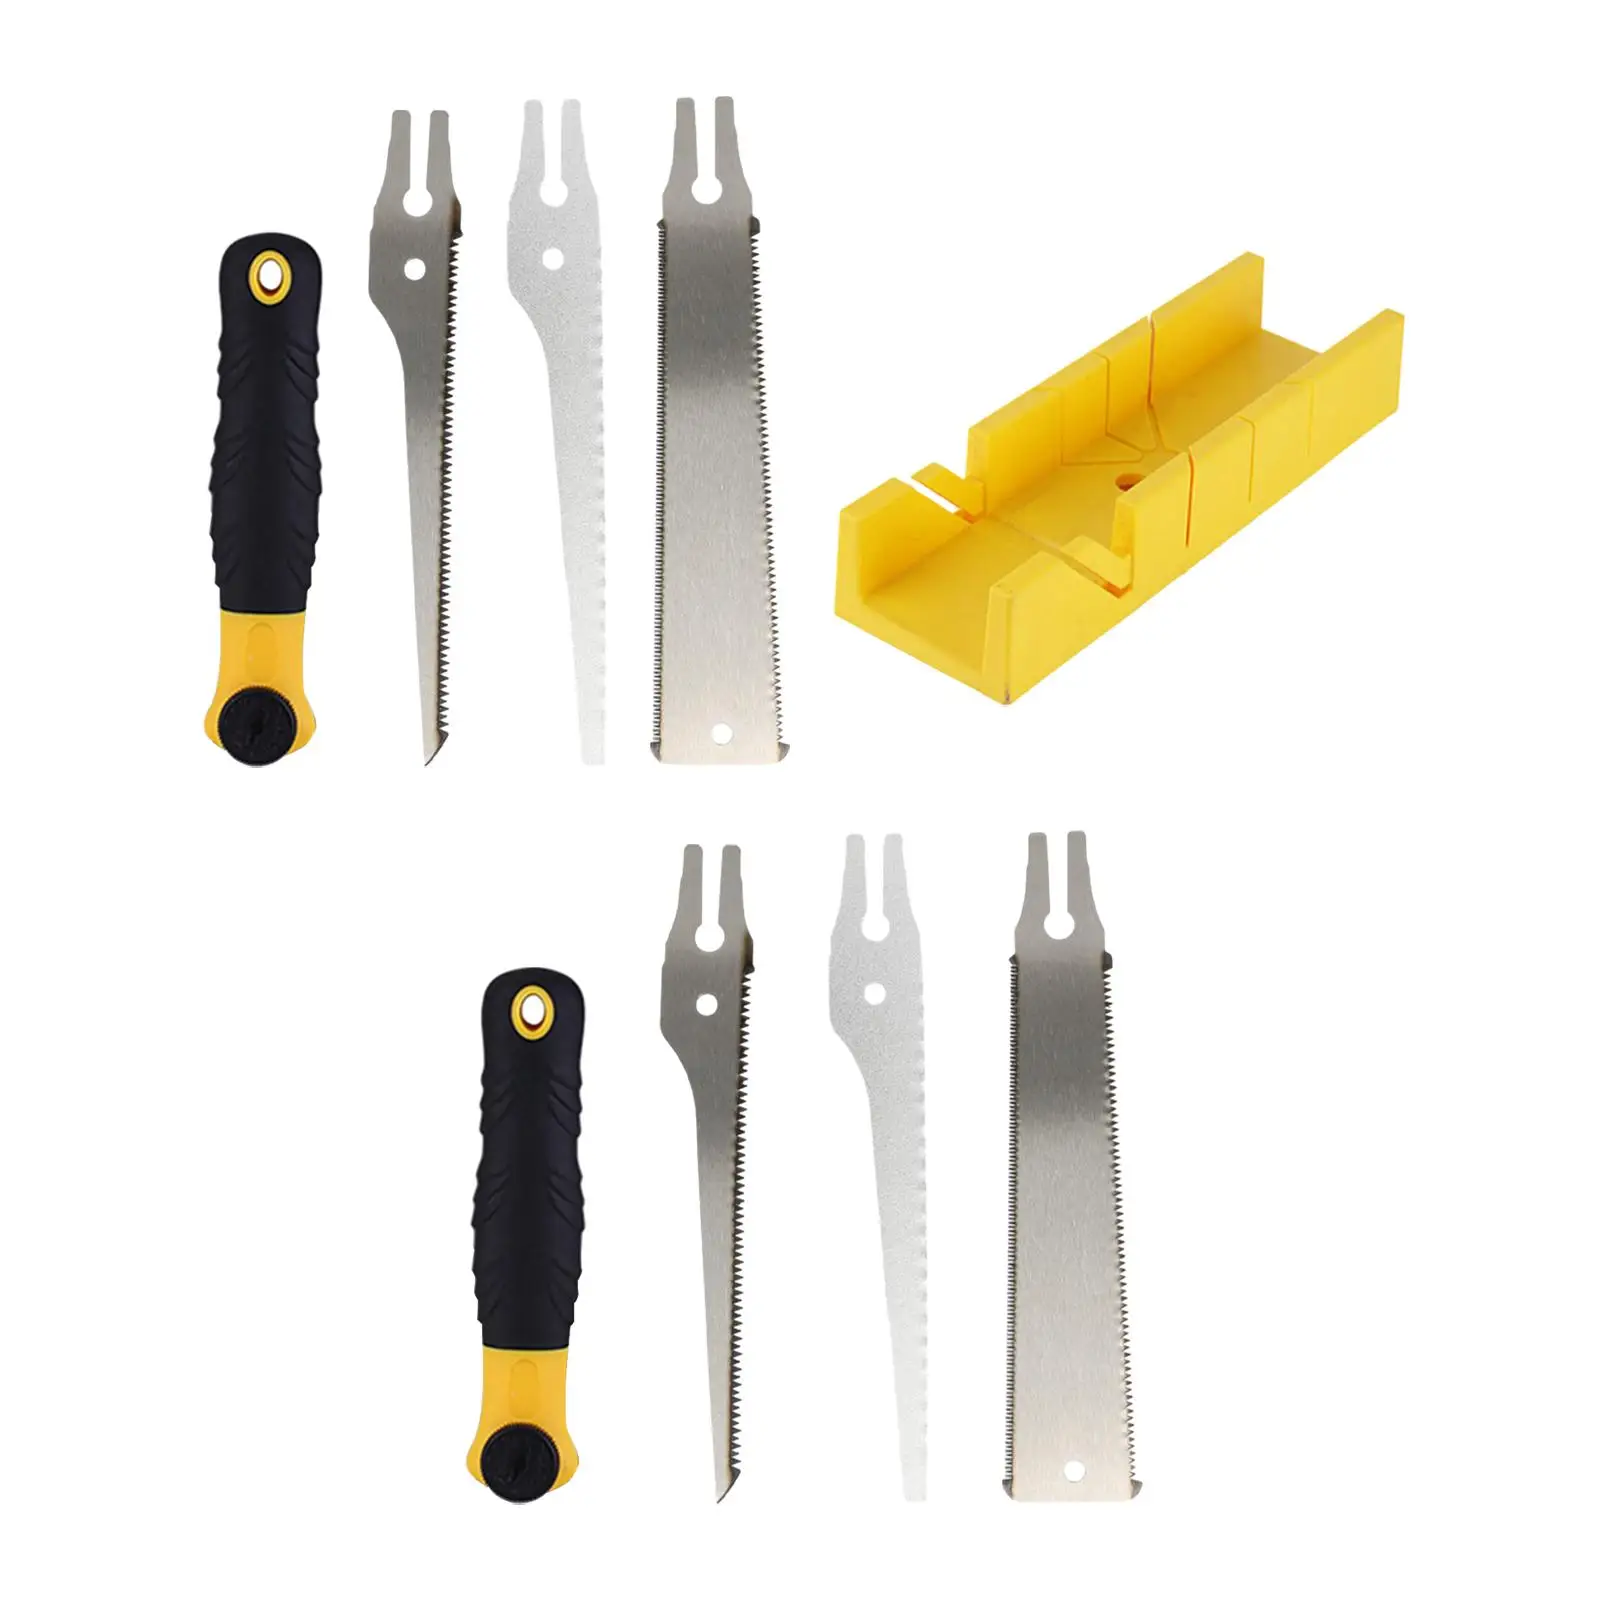 Garden Woodworking Saw Hand Tool Multifunctional Handheld Garden Tool for Cutting Trimming Branches Gardening Outdoor